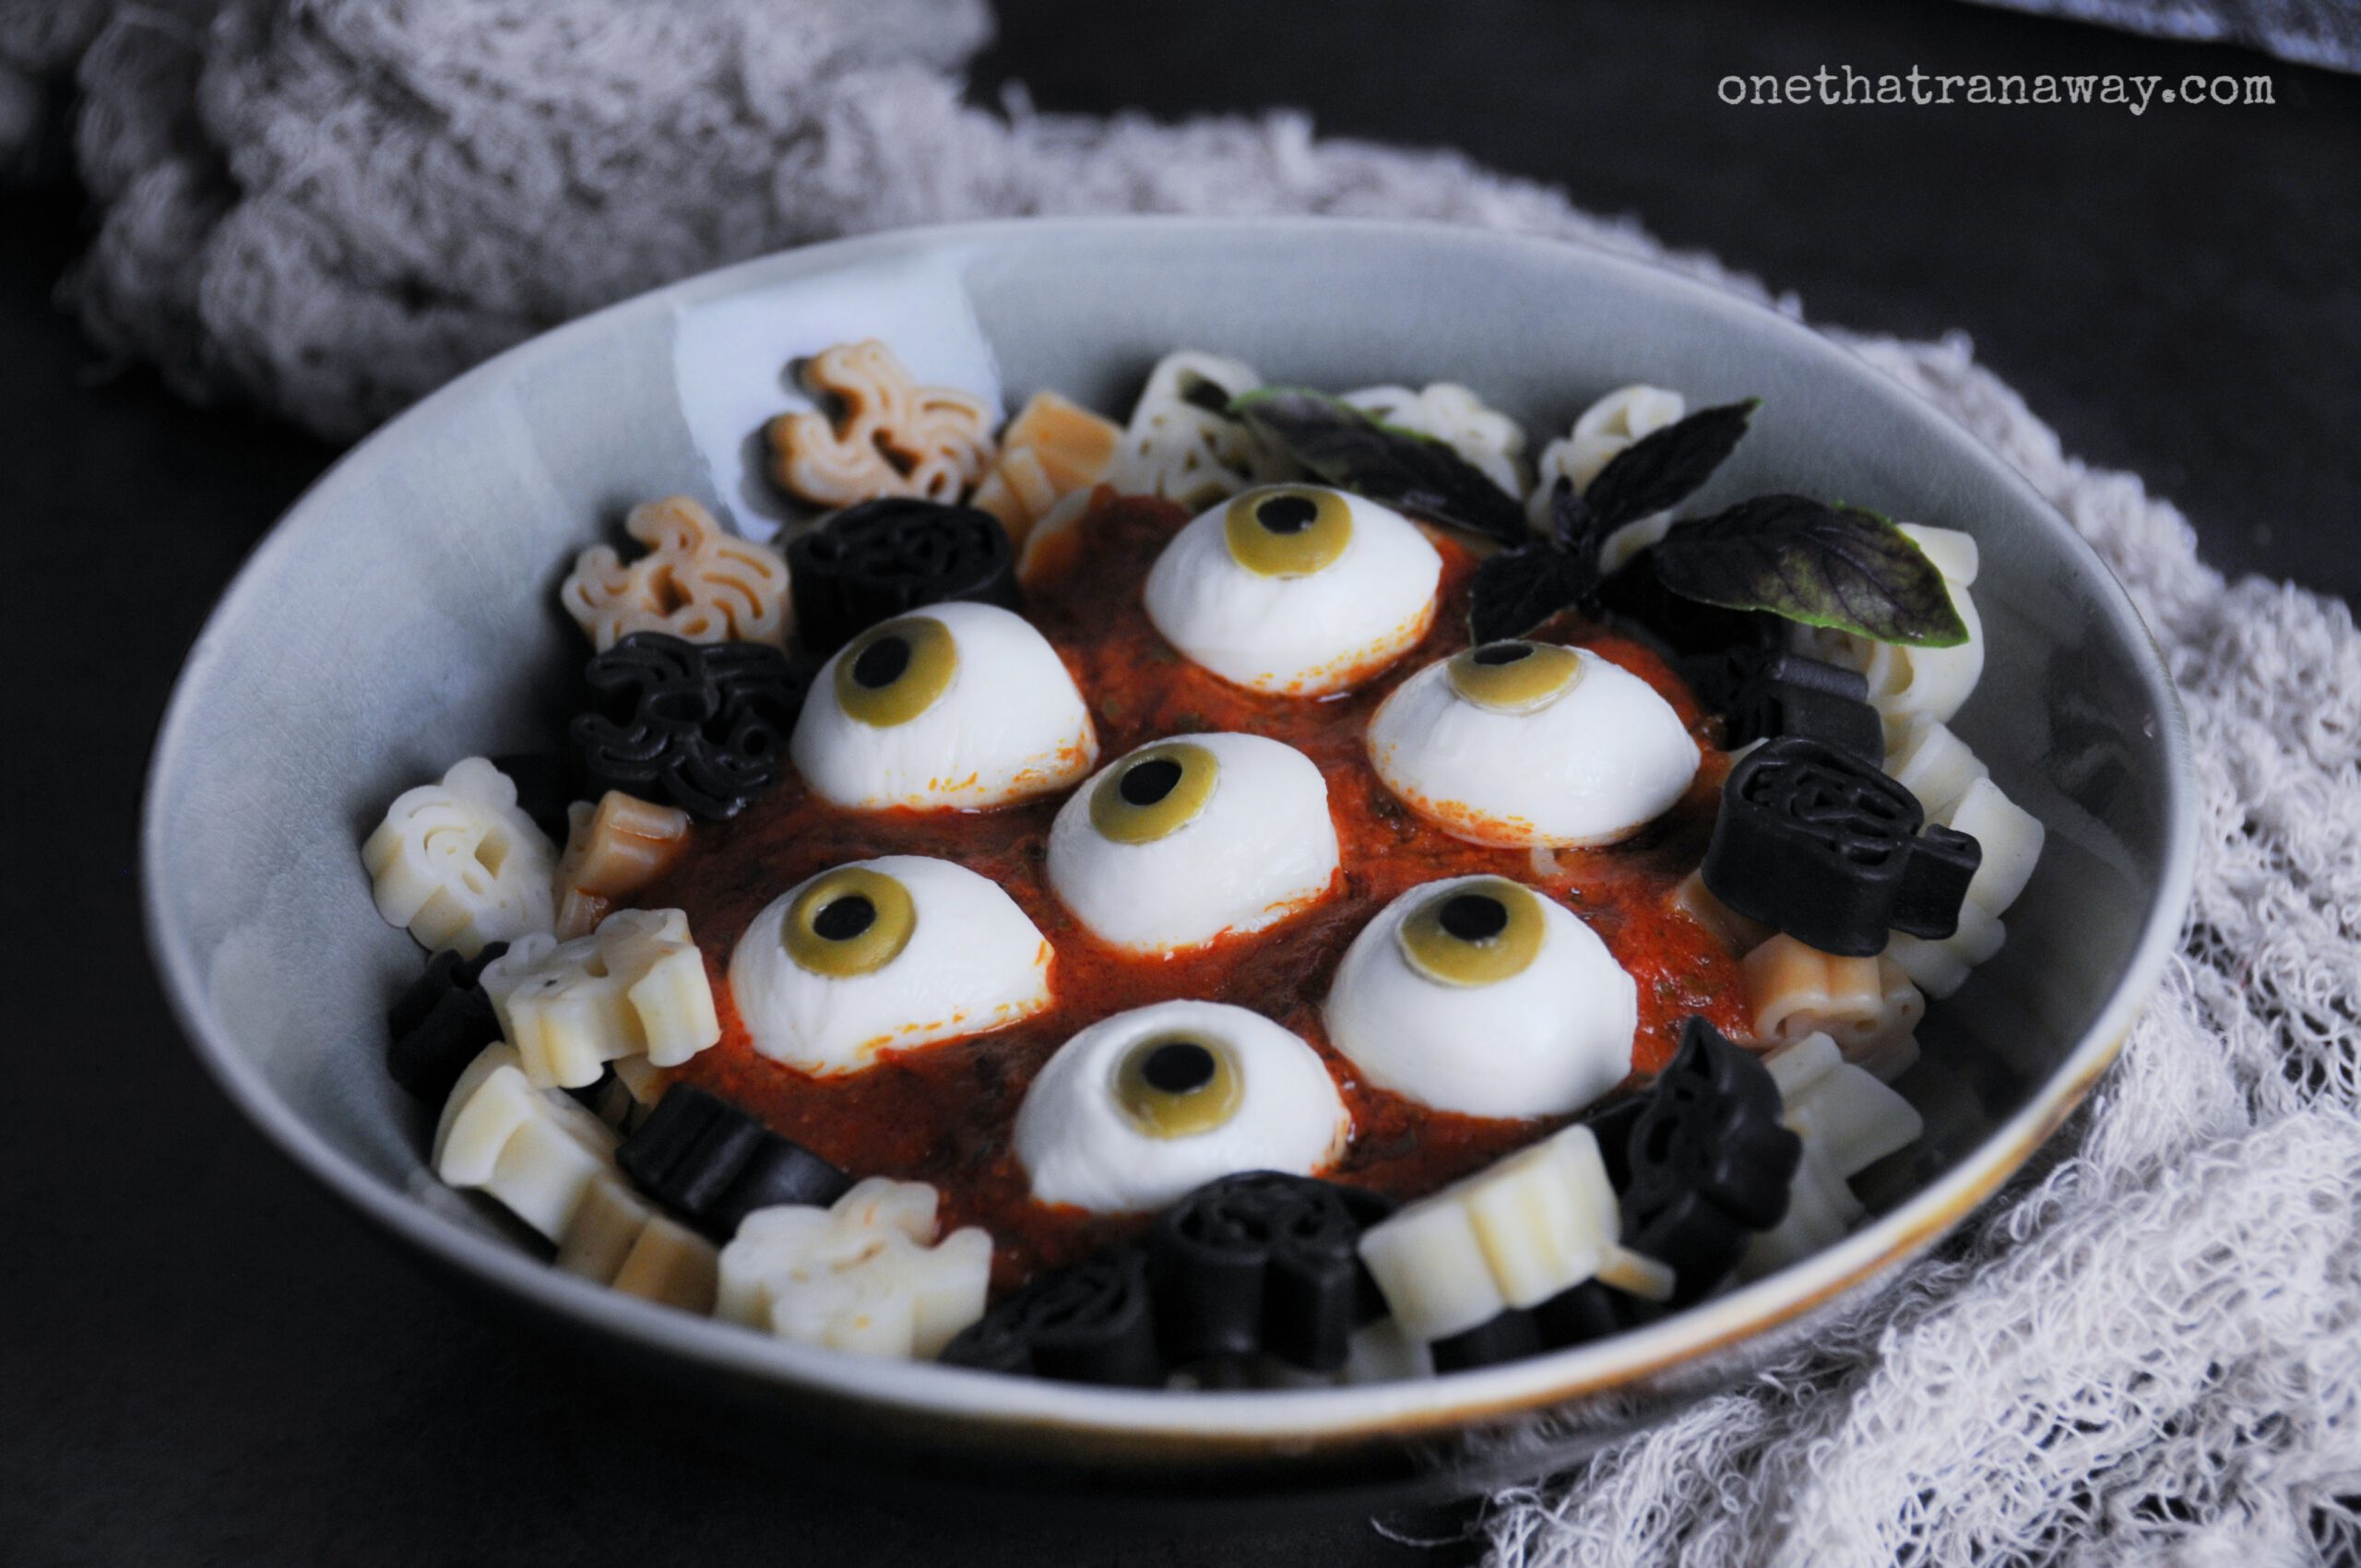 a plate with Halloween shaped pasta and eyeballs made from mozzarella on a dark background